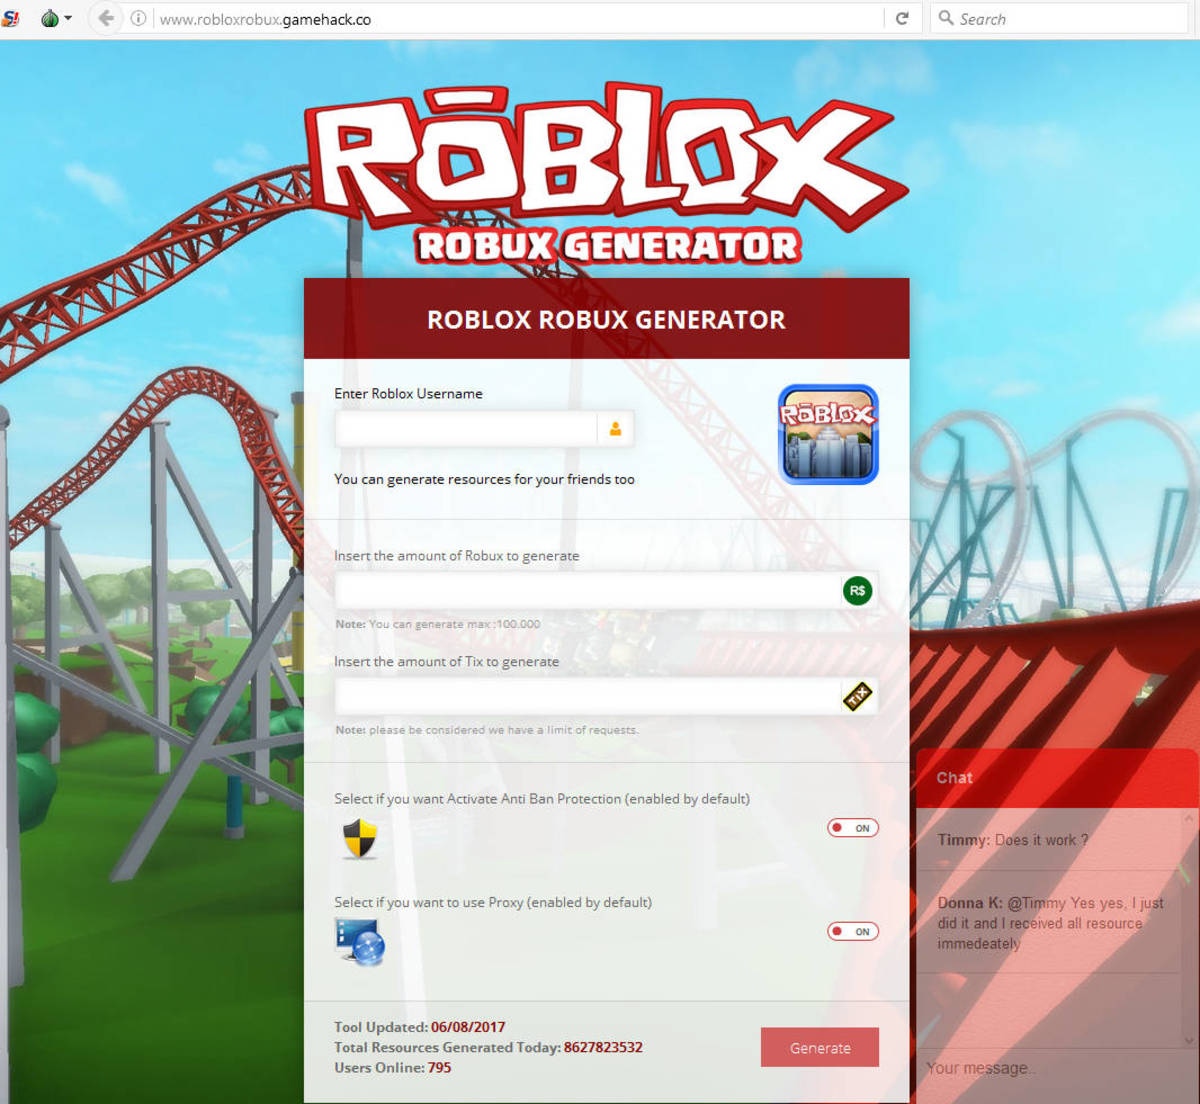 How To Get Free Robux With Only Your Username